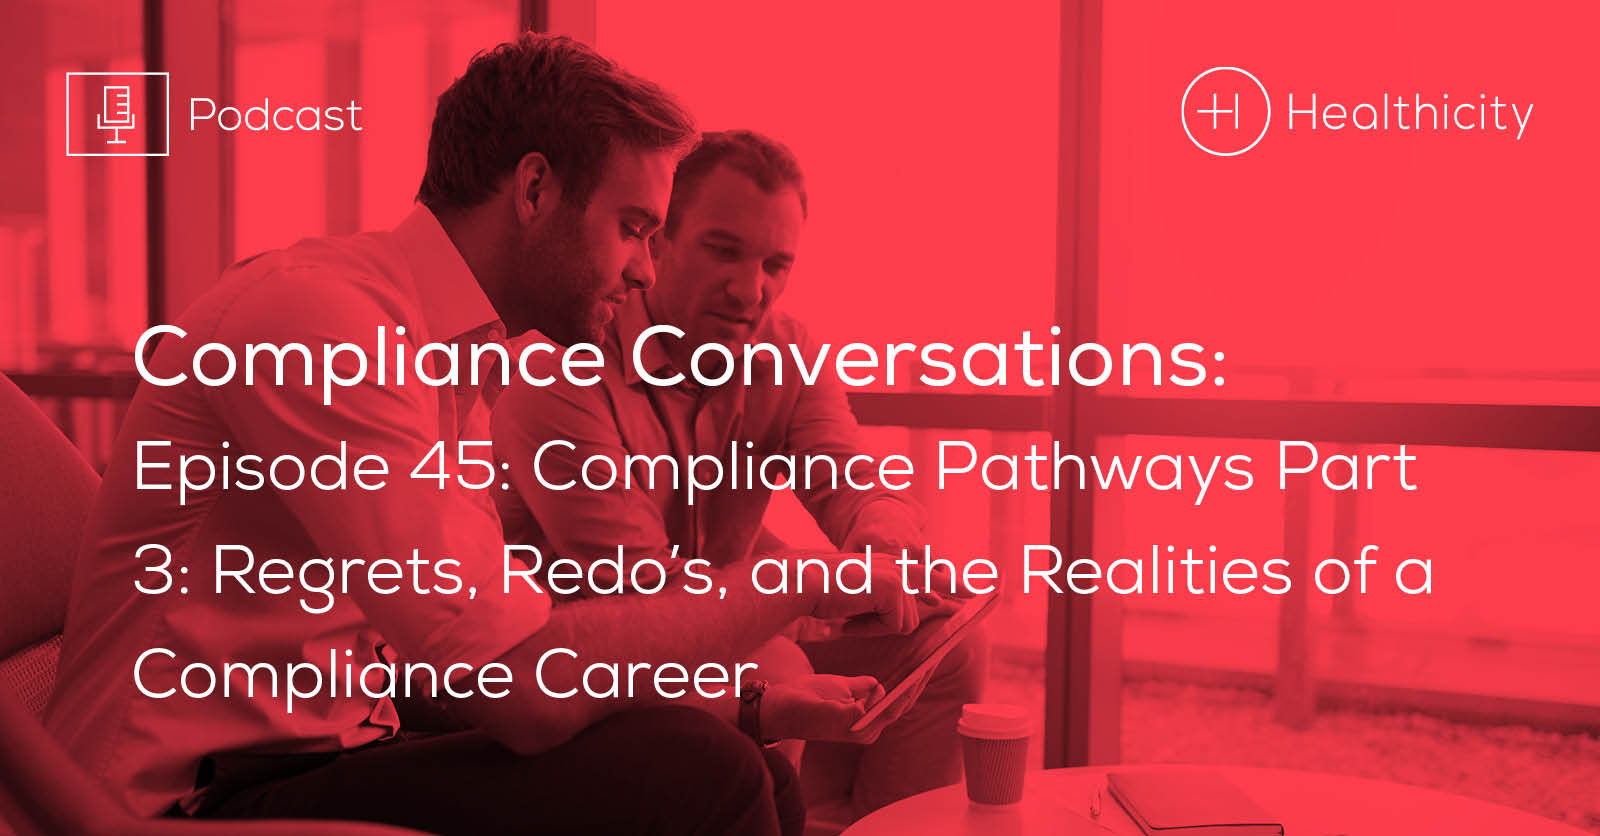 Listen to the Episode - Compliance Pathways Part 3: Regrets, Redo's, and the Realities of a Compliance Career